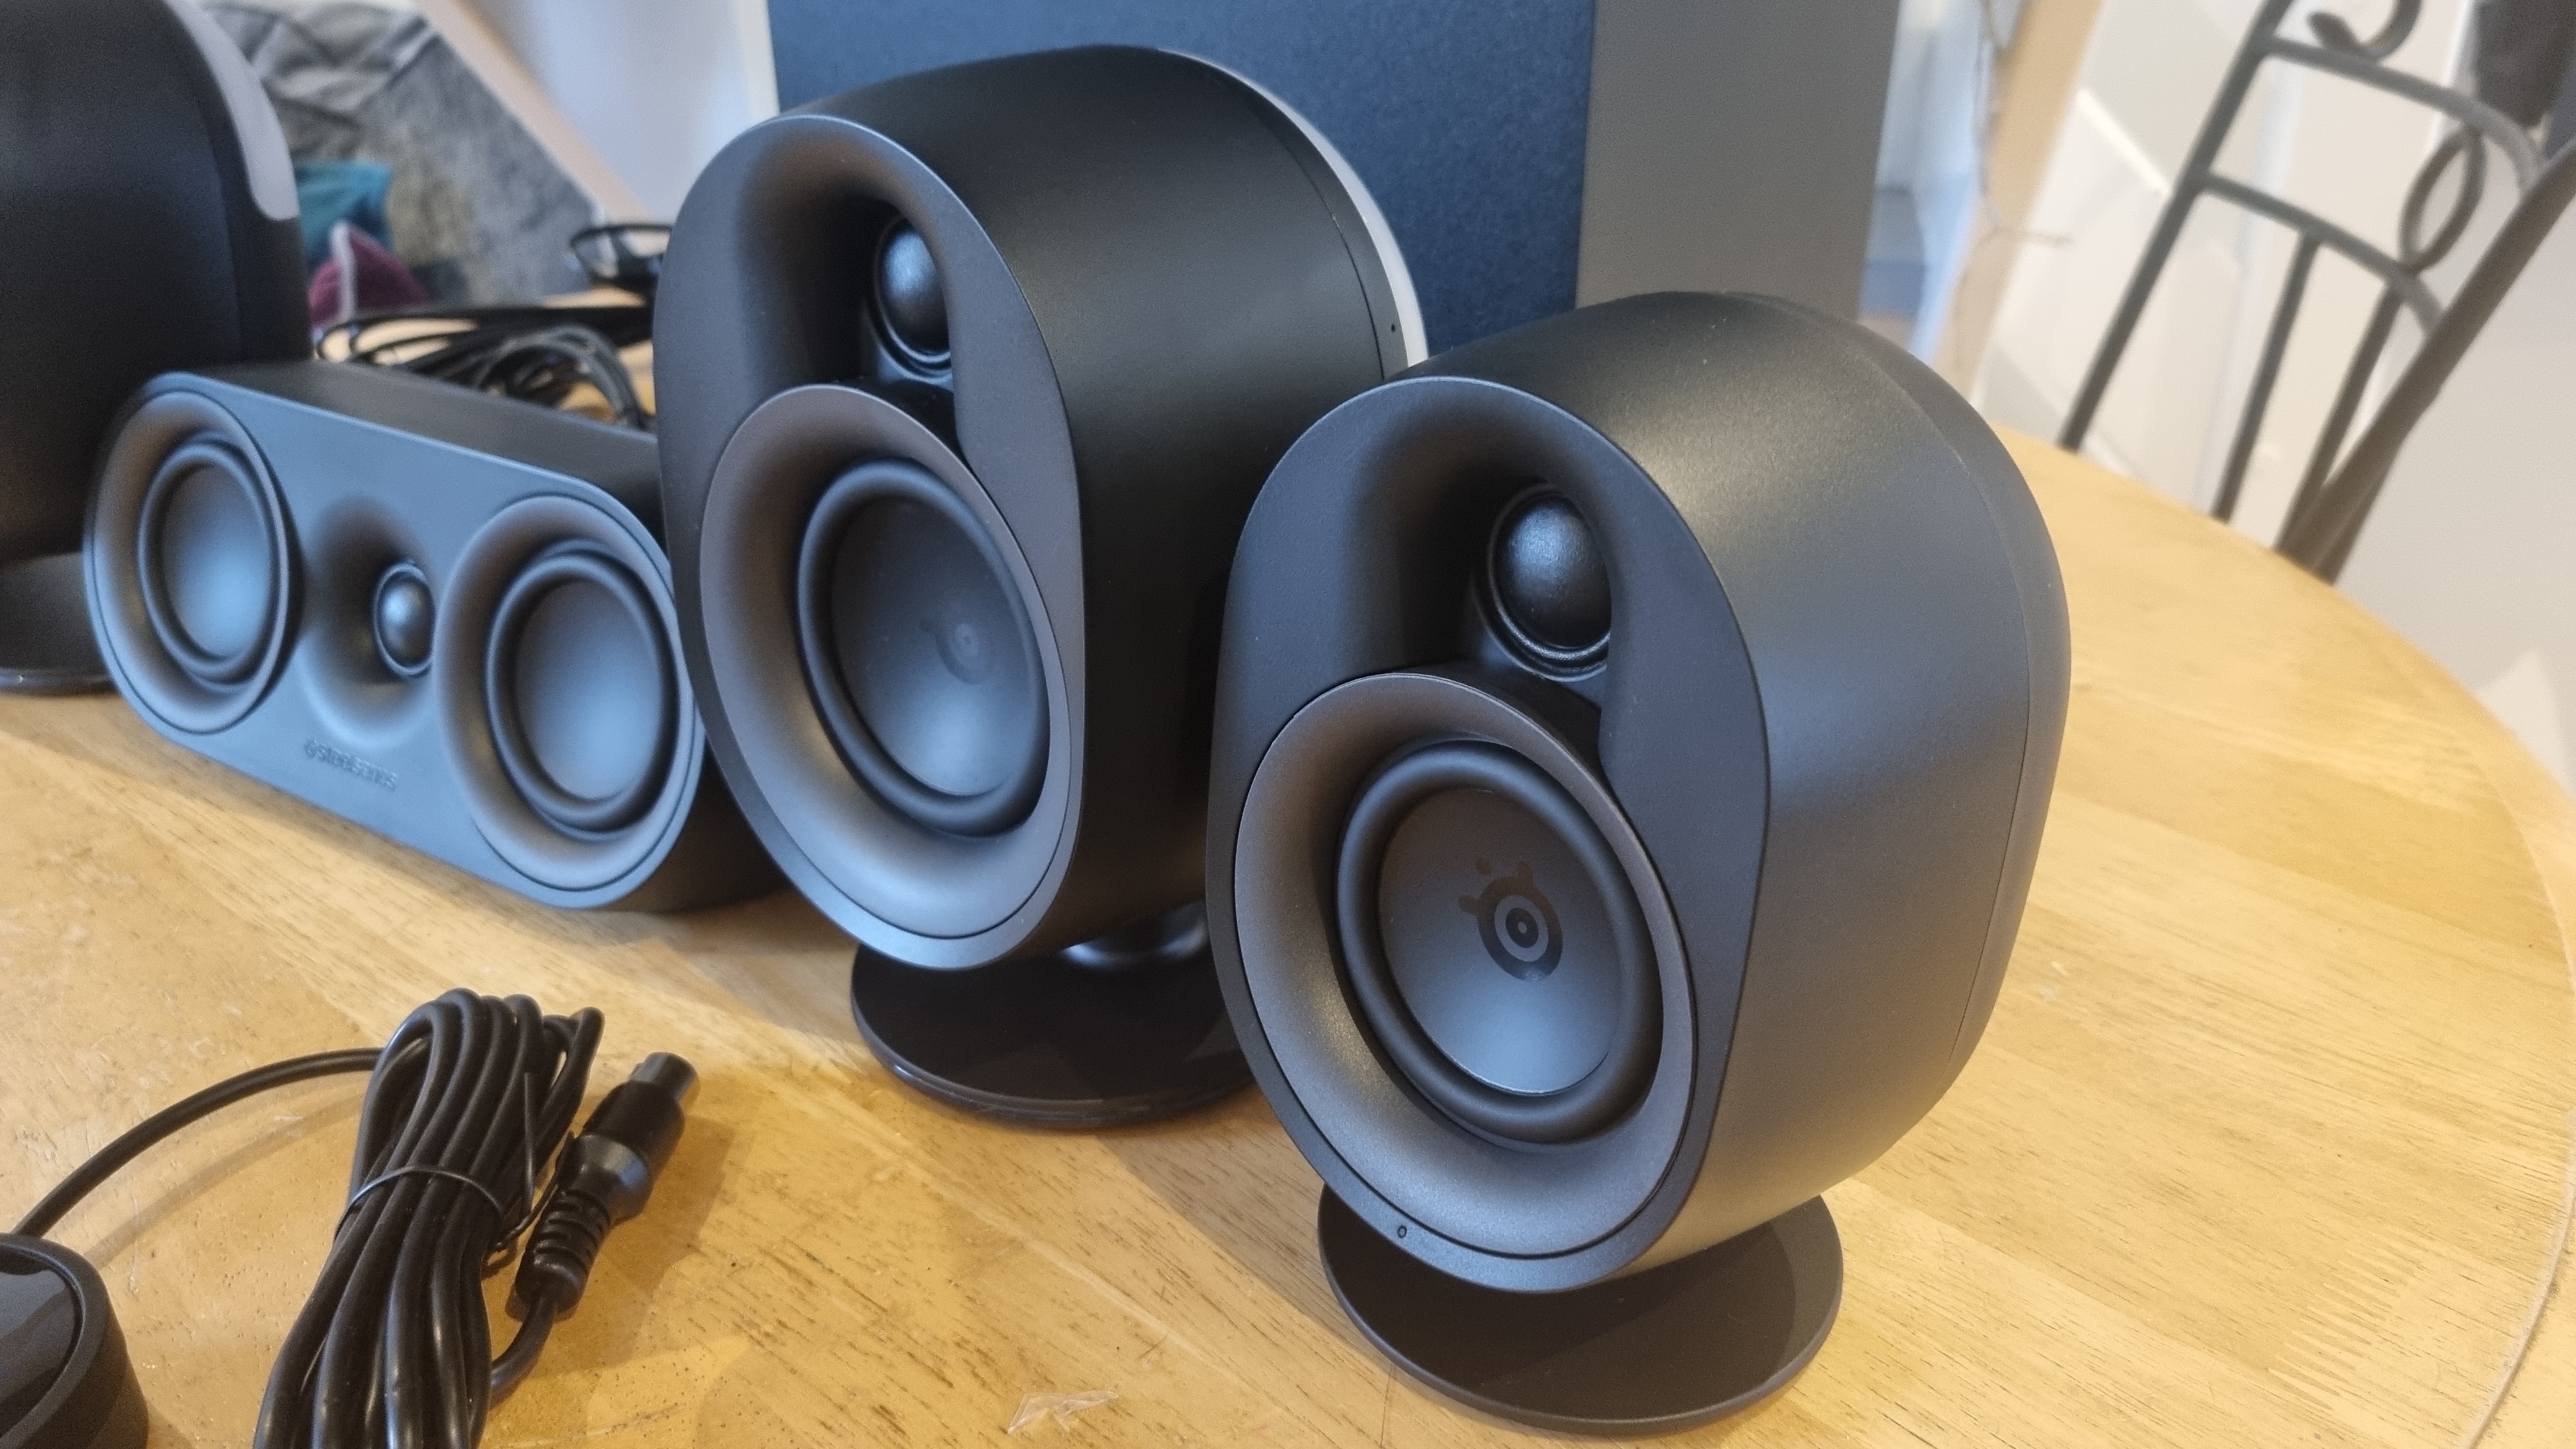 The front left and rear left speakers of the SteelSeries Arena 9, showing the size difference between the two